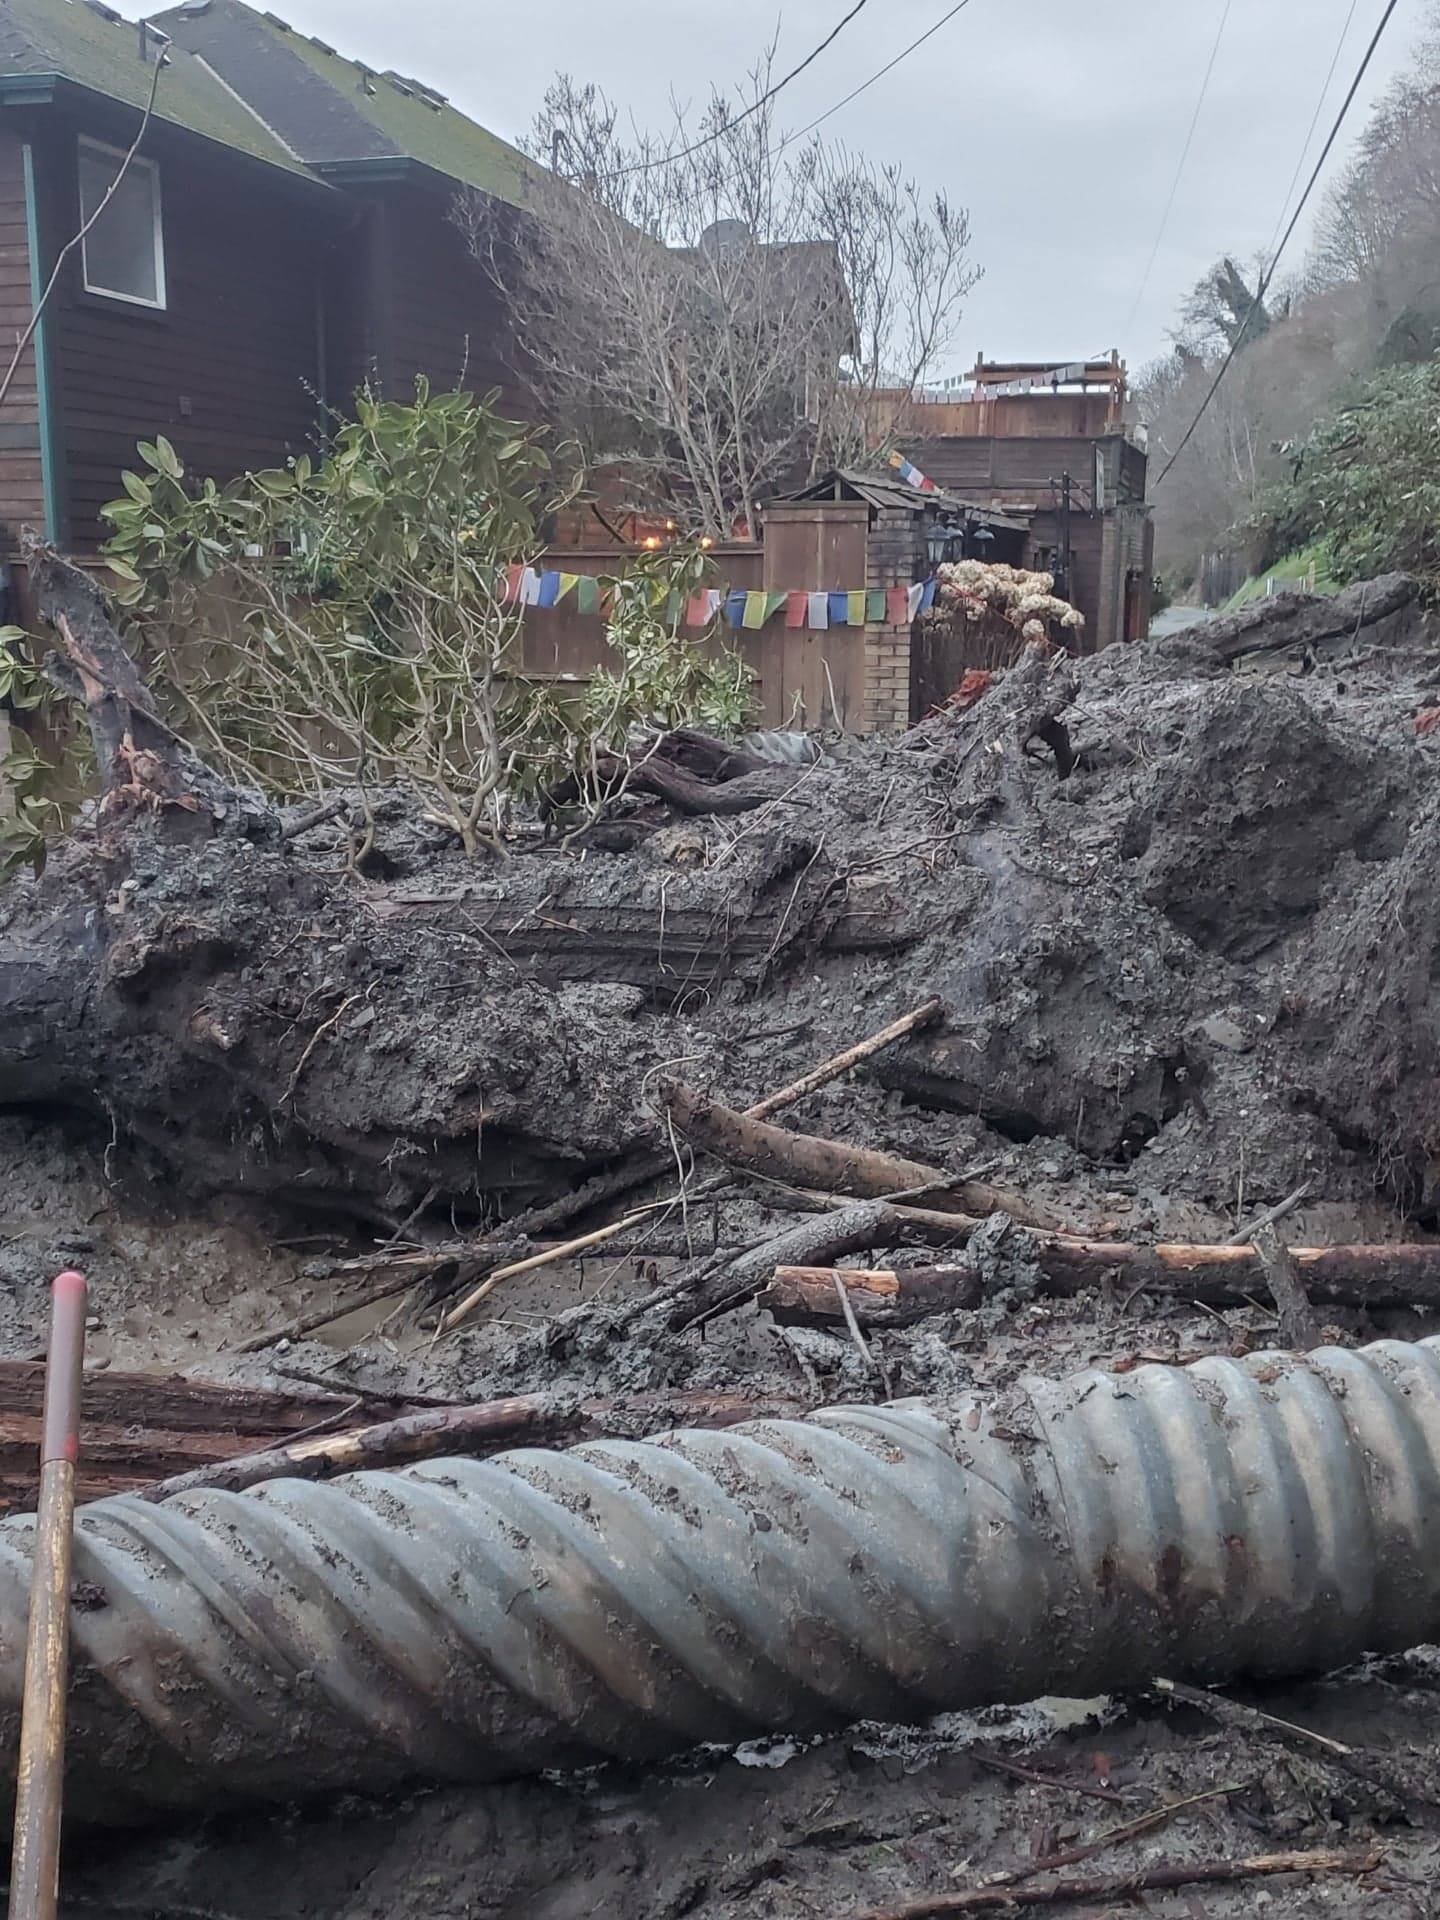 The past two weeks of rainy weather have caused two landslides near Eugene Elfrank’s Hastings Road residence in Clinton. Fire department officials said landslides are nothing out of the ordinary for this time of year for certain areas of Whidbey. Pictured here is the debris from the most recent slide that happened Monday night. Photo provided by Eugene Elfrank